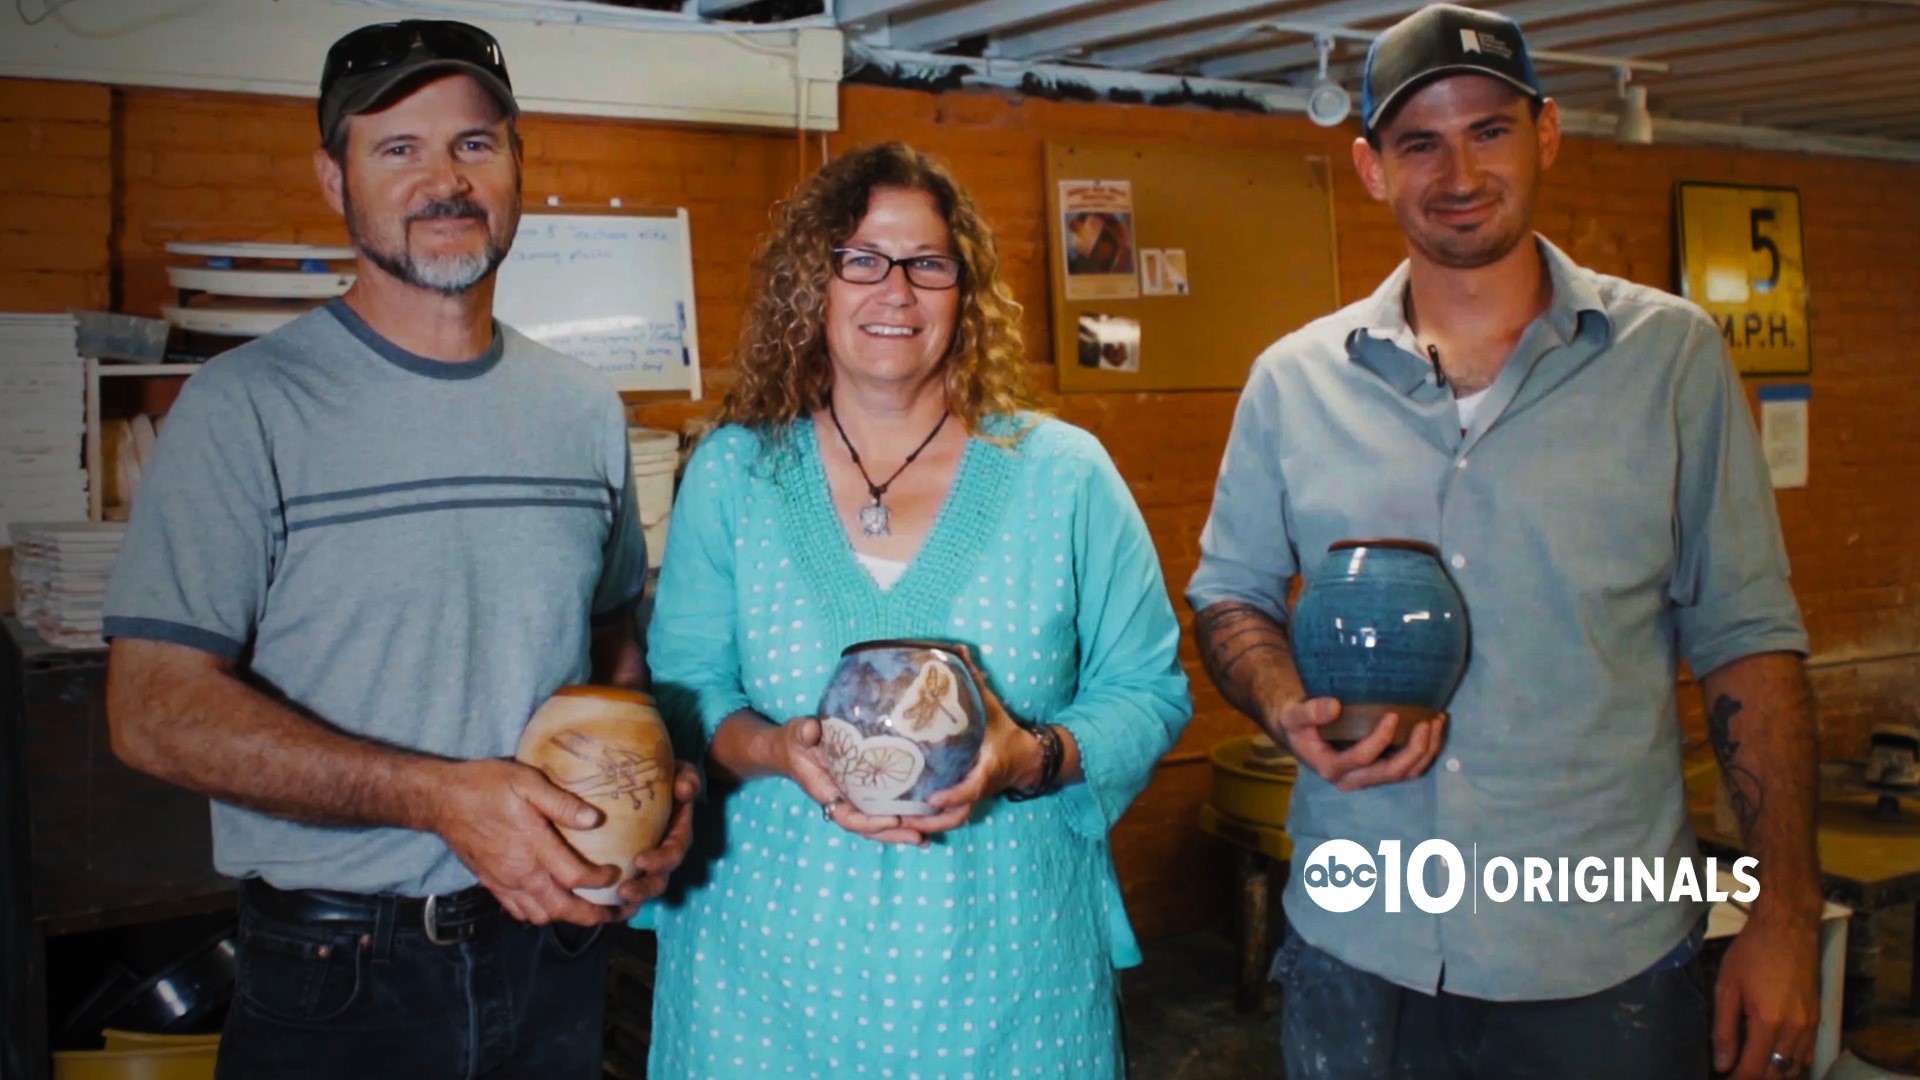 The Jackson family has made more than 200 urns for Camp Fire survivors and victims combined.